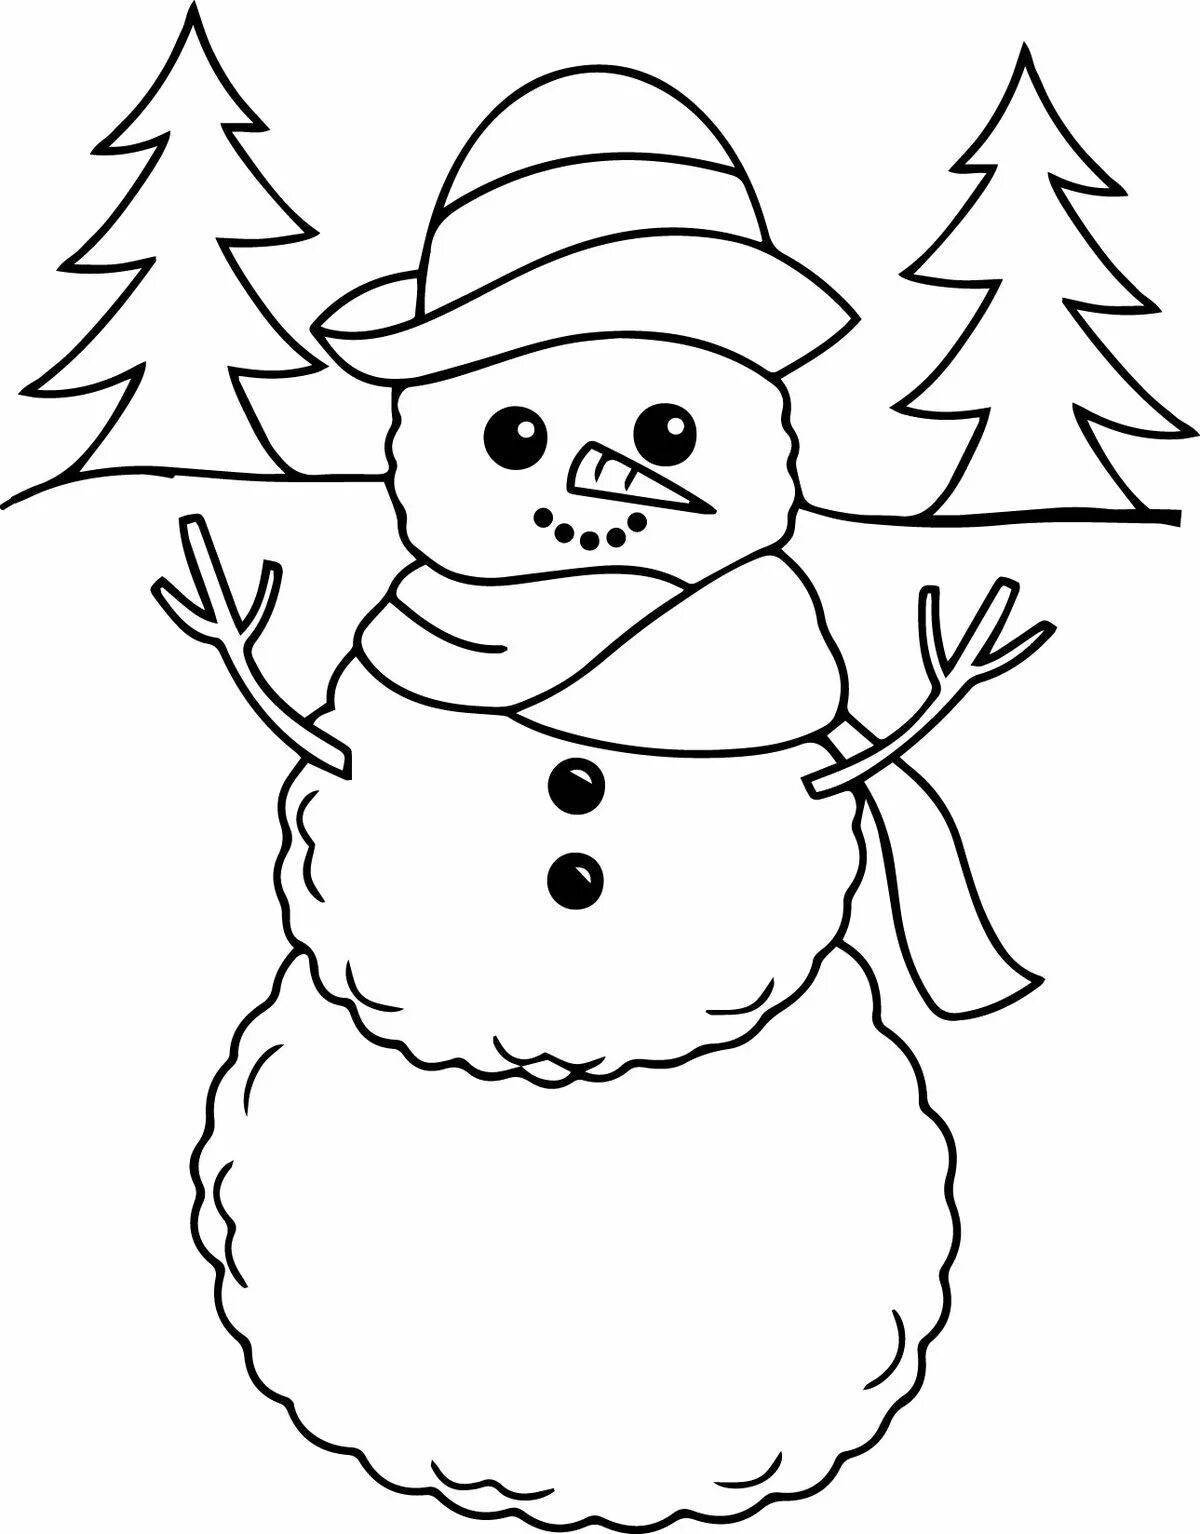 Fancy Christmas snowman coloring book